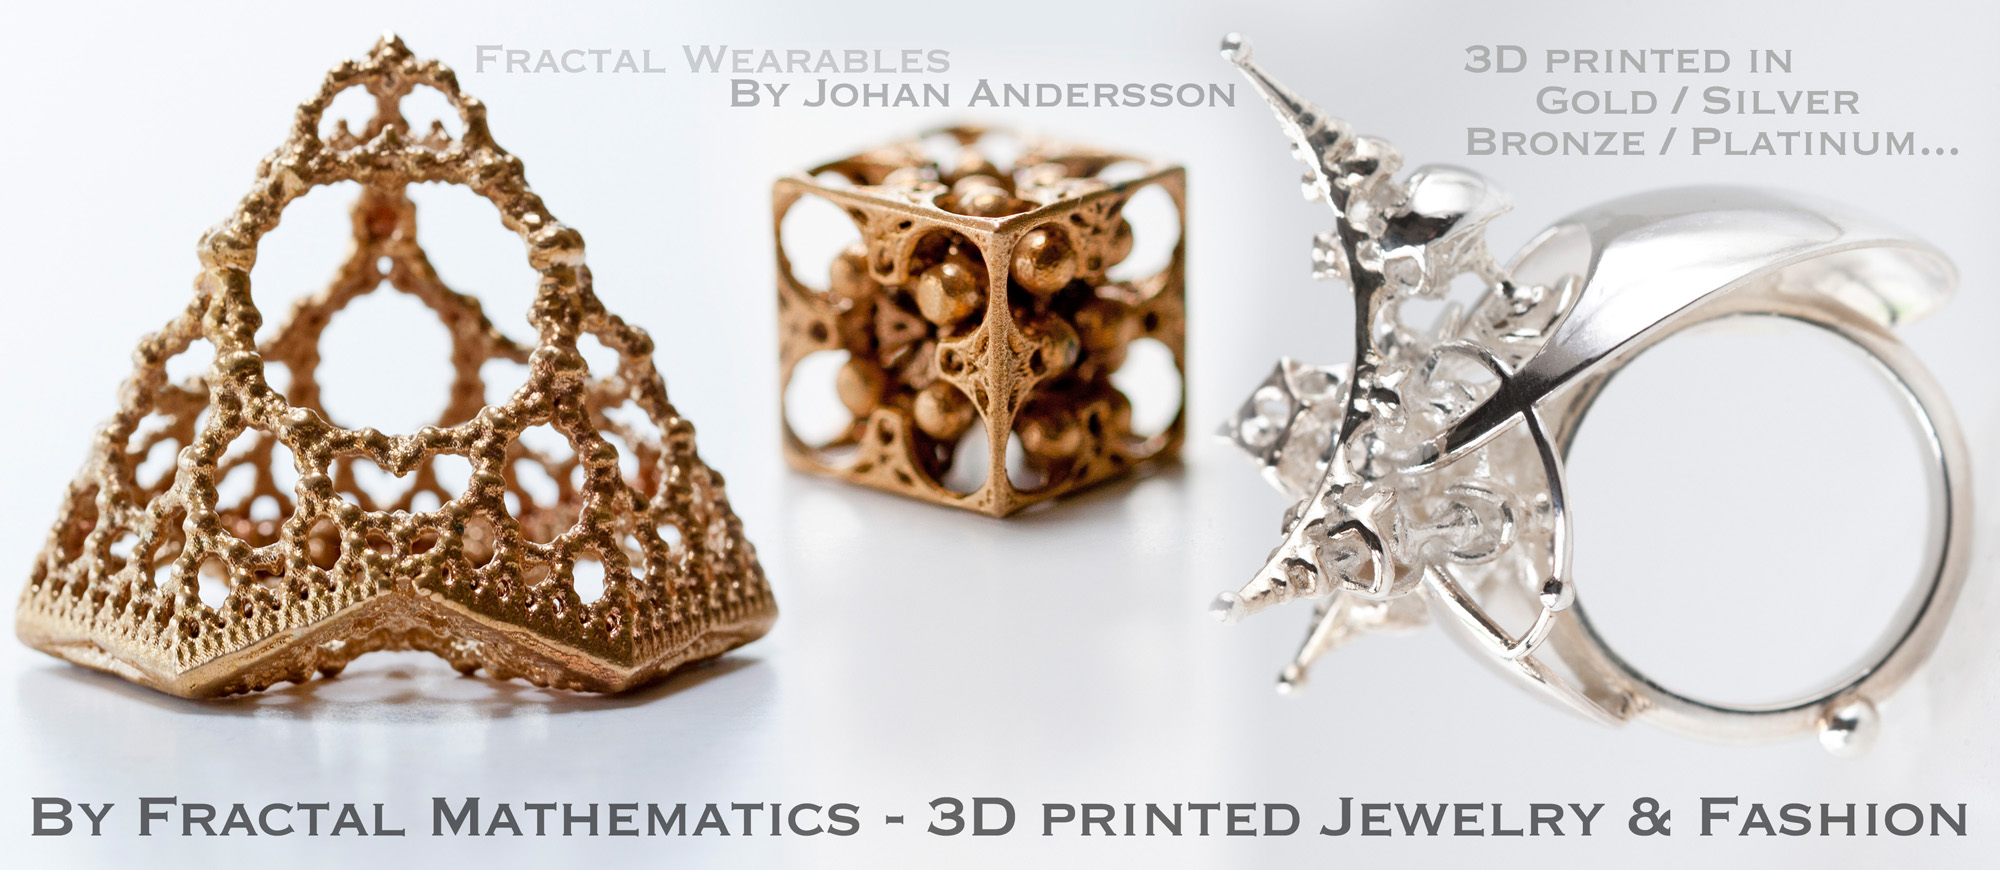 3D printed Jewelry - By Fractal Mathematics